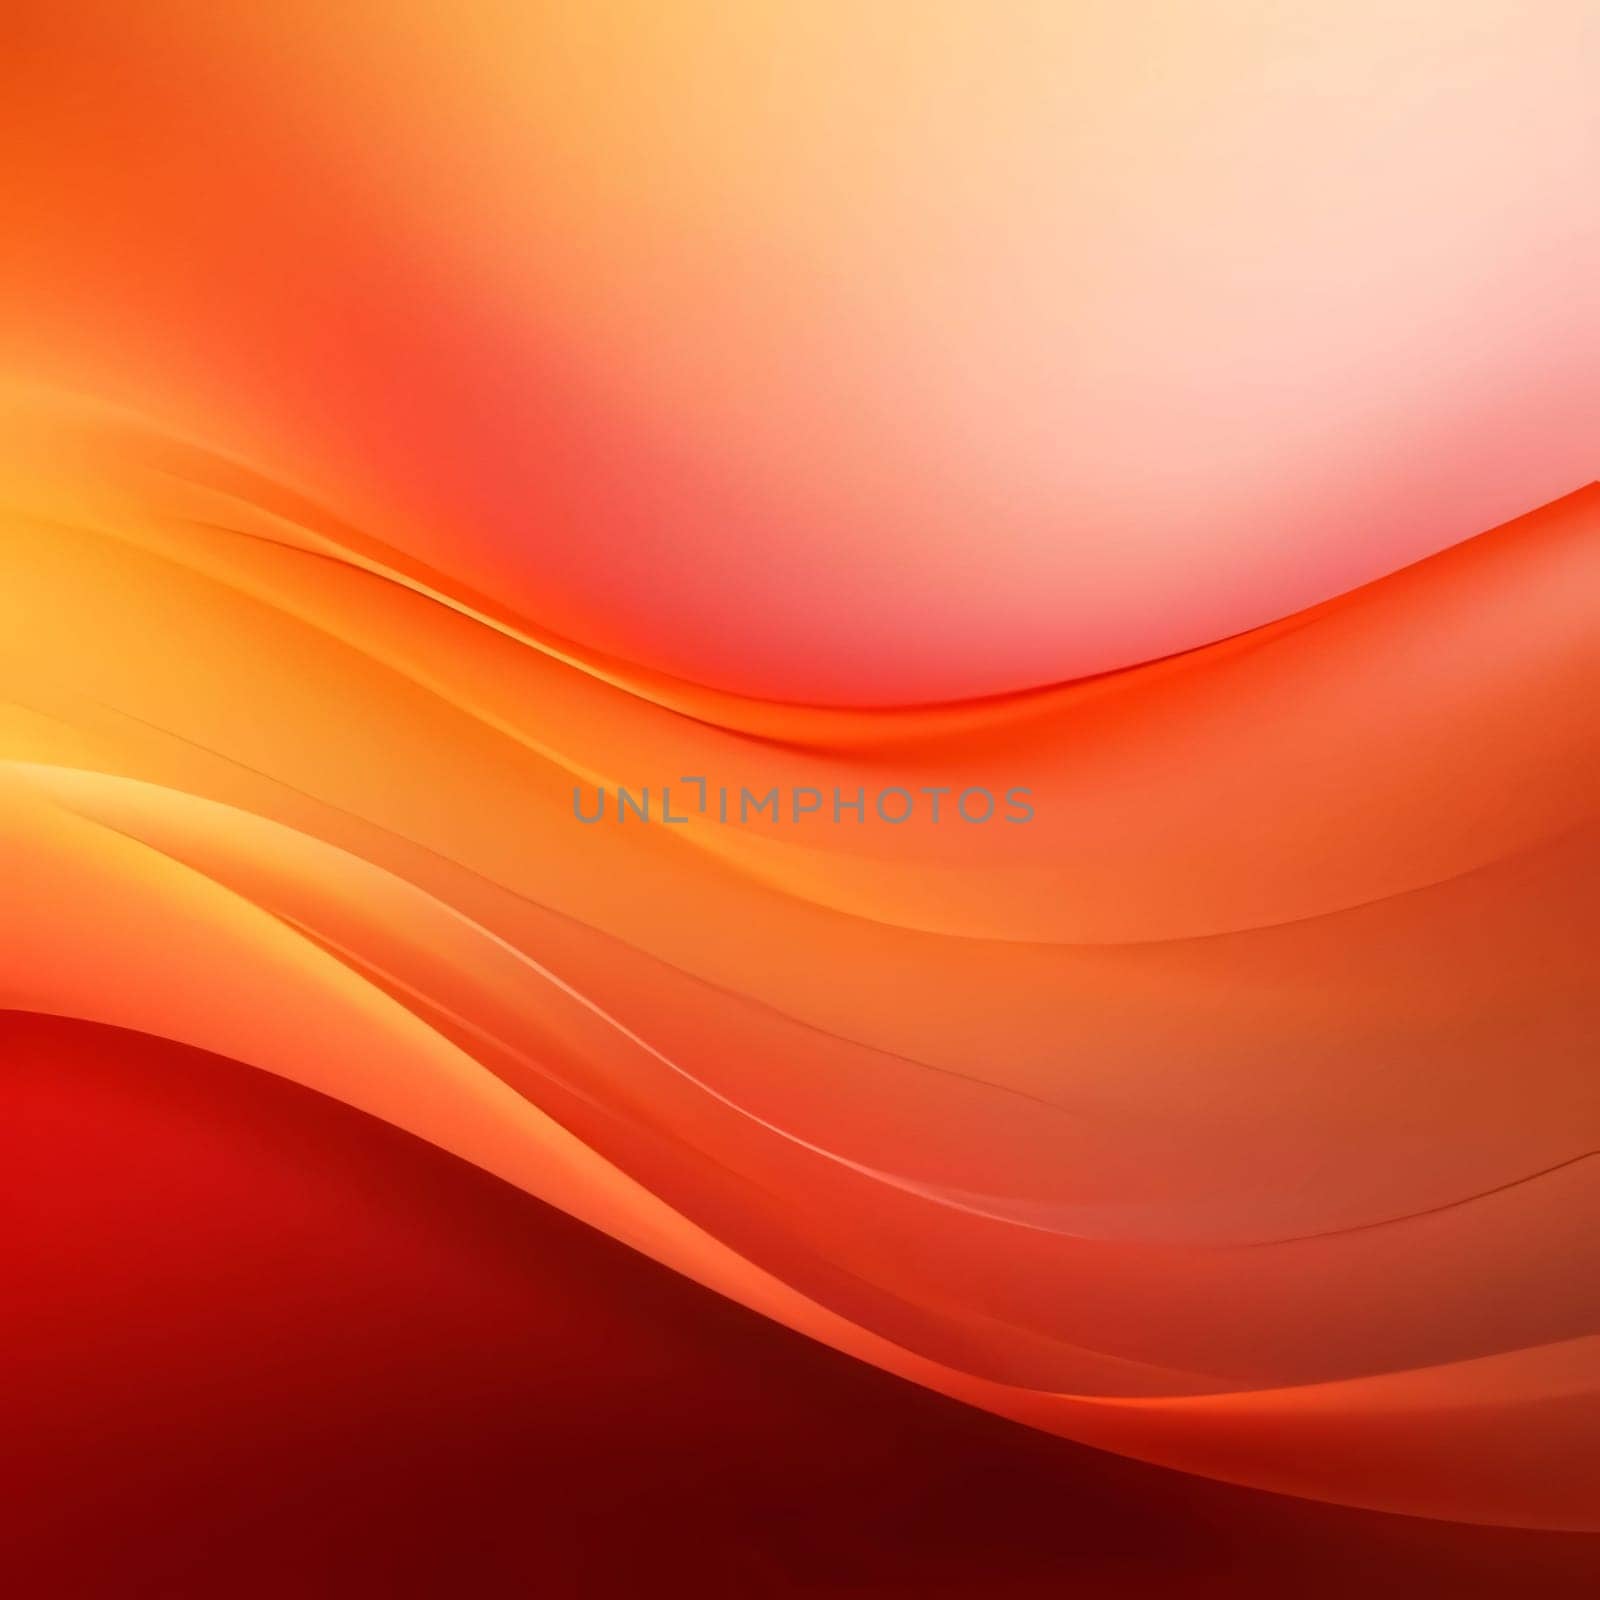 Abstract background design: abstract background with smooth lines in orange and red colors, vector illustration